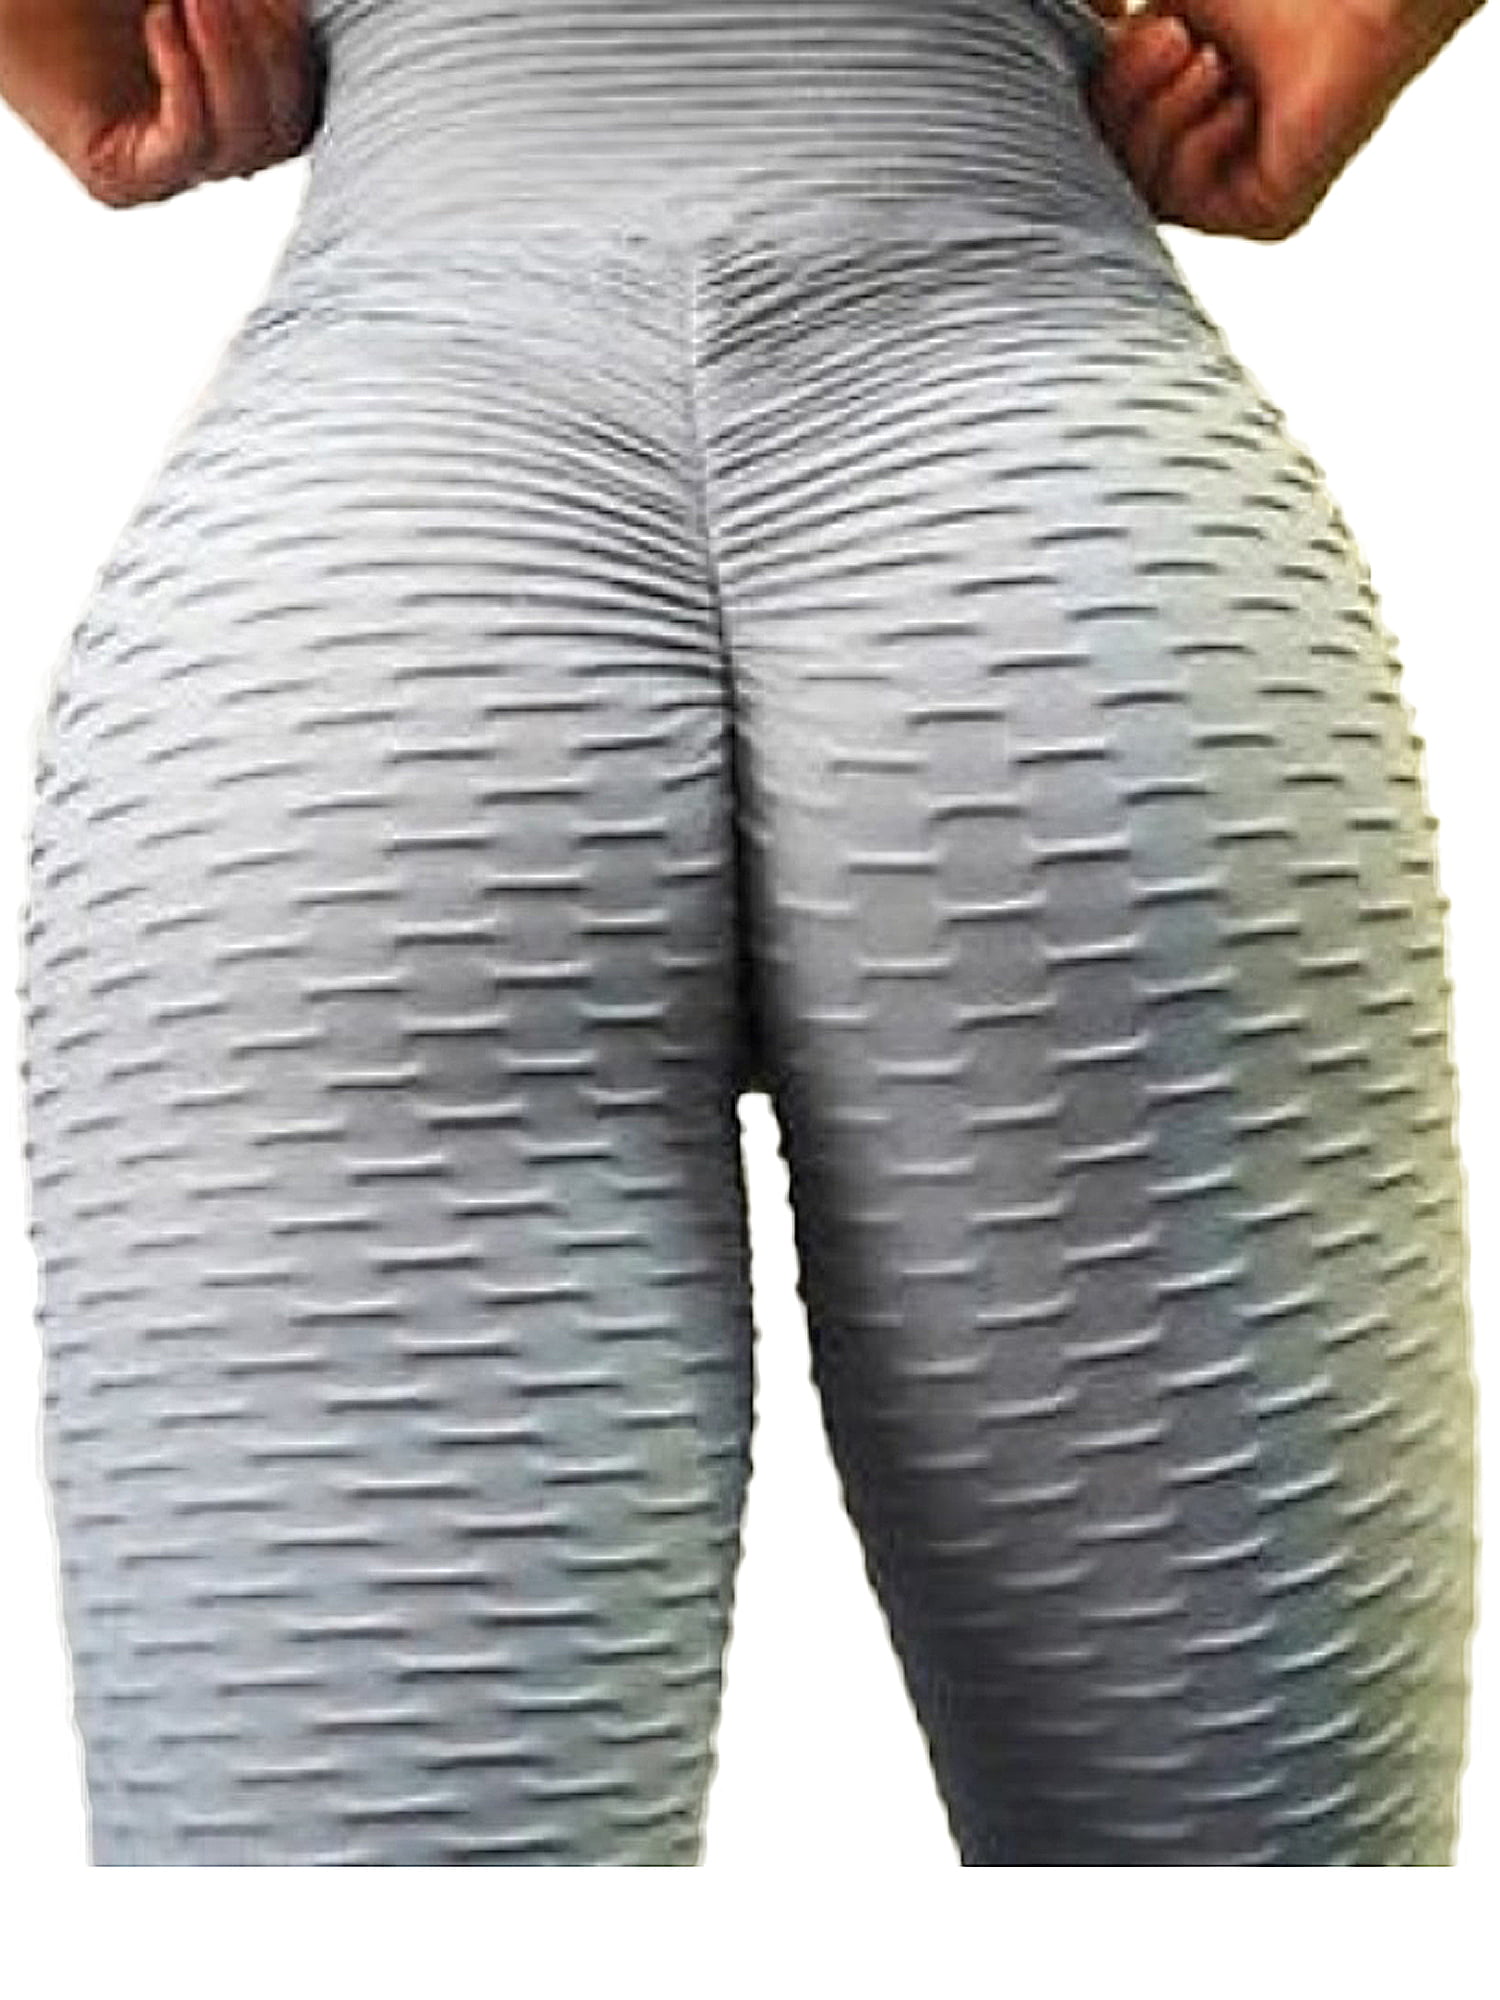 Women Yoga Gym Anti-Cellulite Leggings Sports Solid Push Up Ruched Elastic Pants 